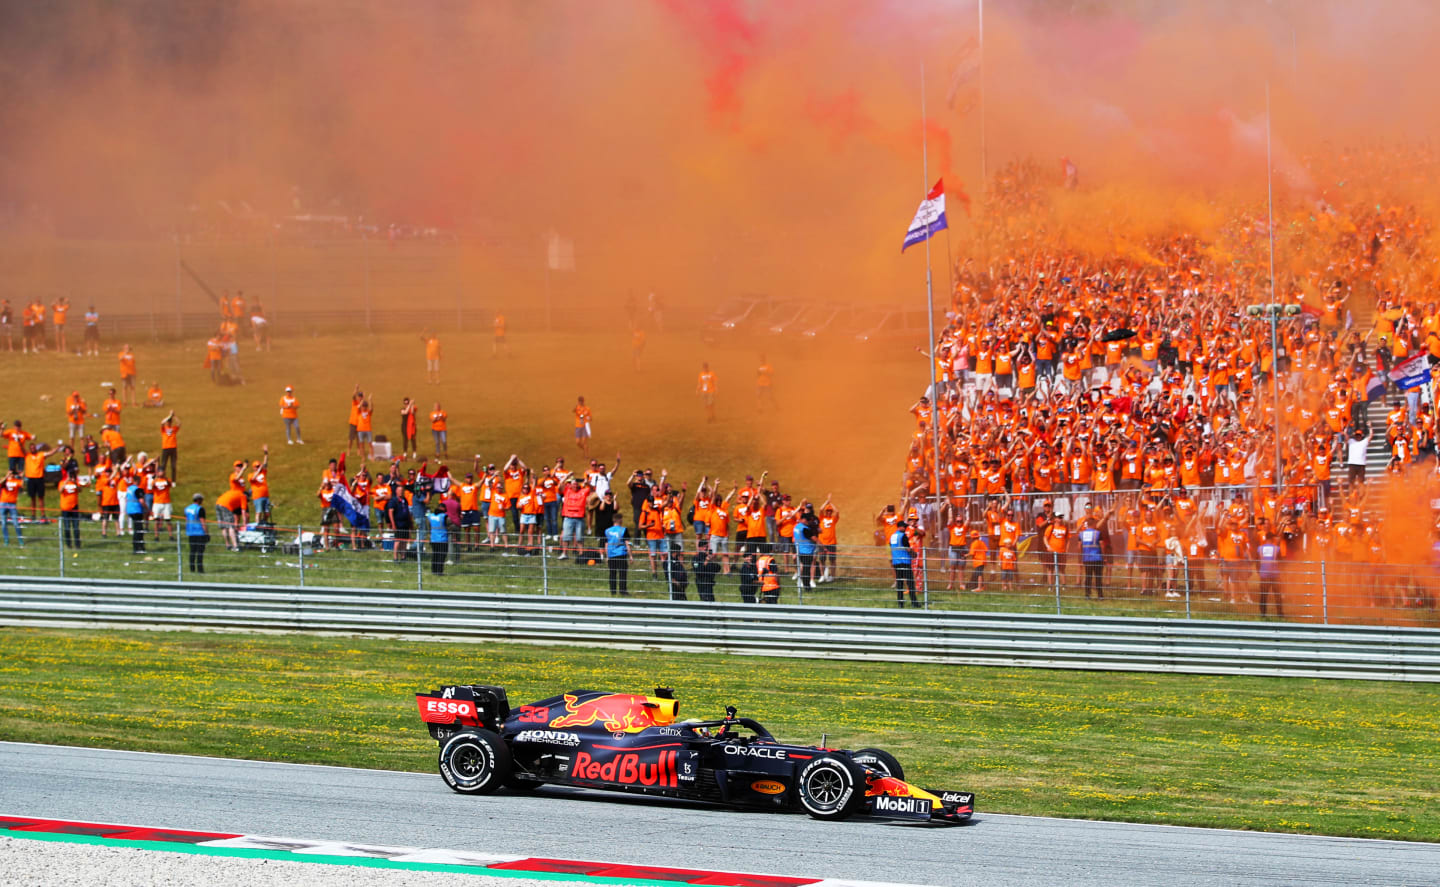 SPIELBERG, AUSTRIA - JULY 04: Race winner Max Verstappen of the Netherlands driving the (33) Red